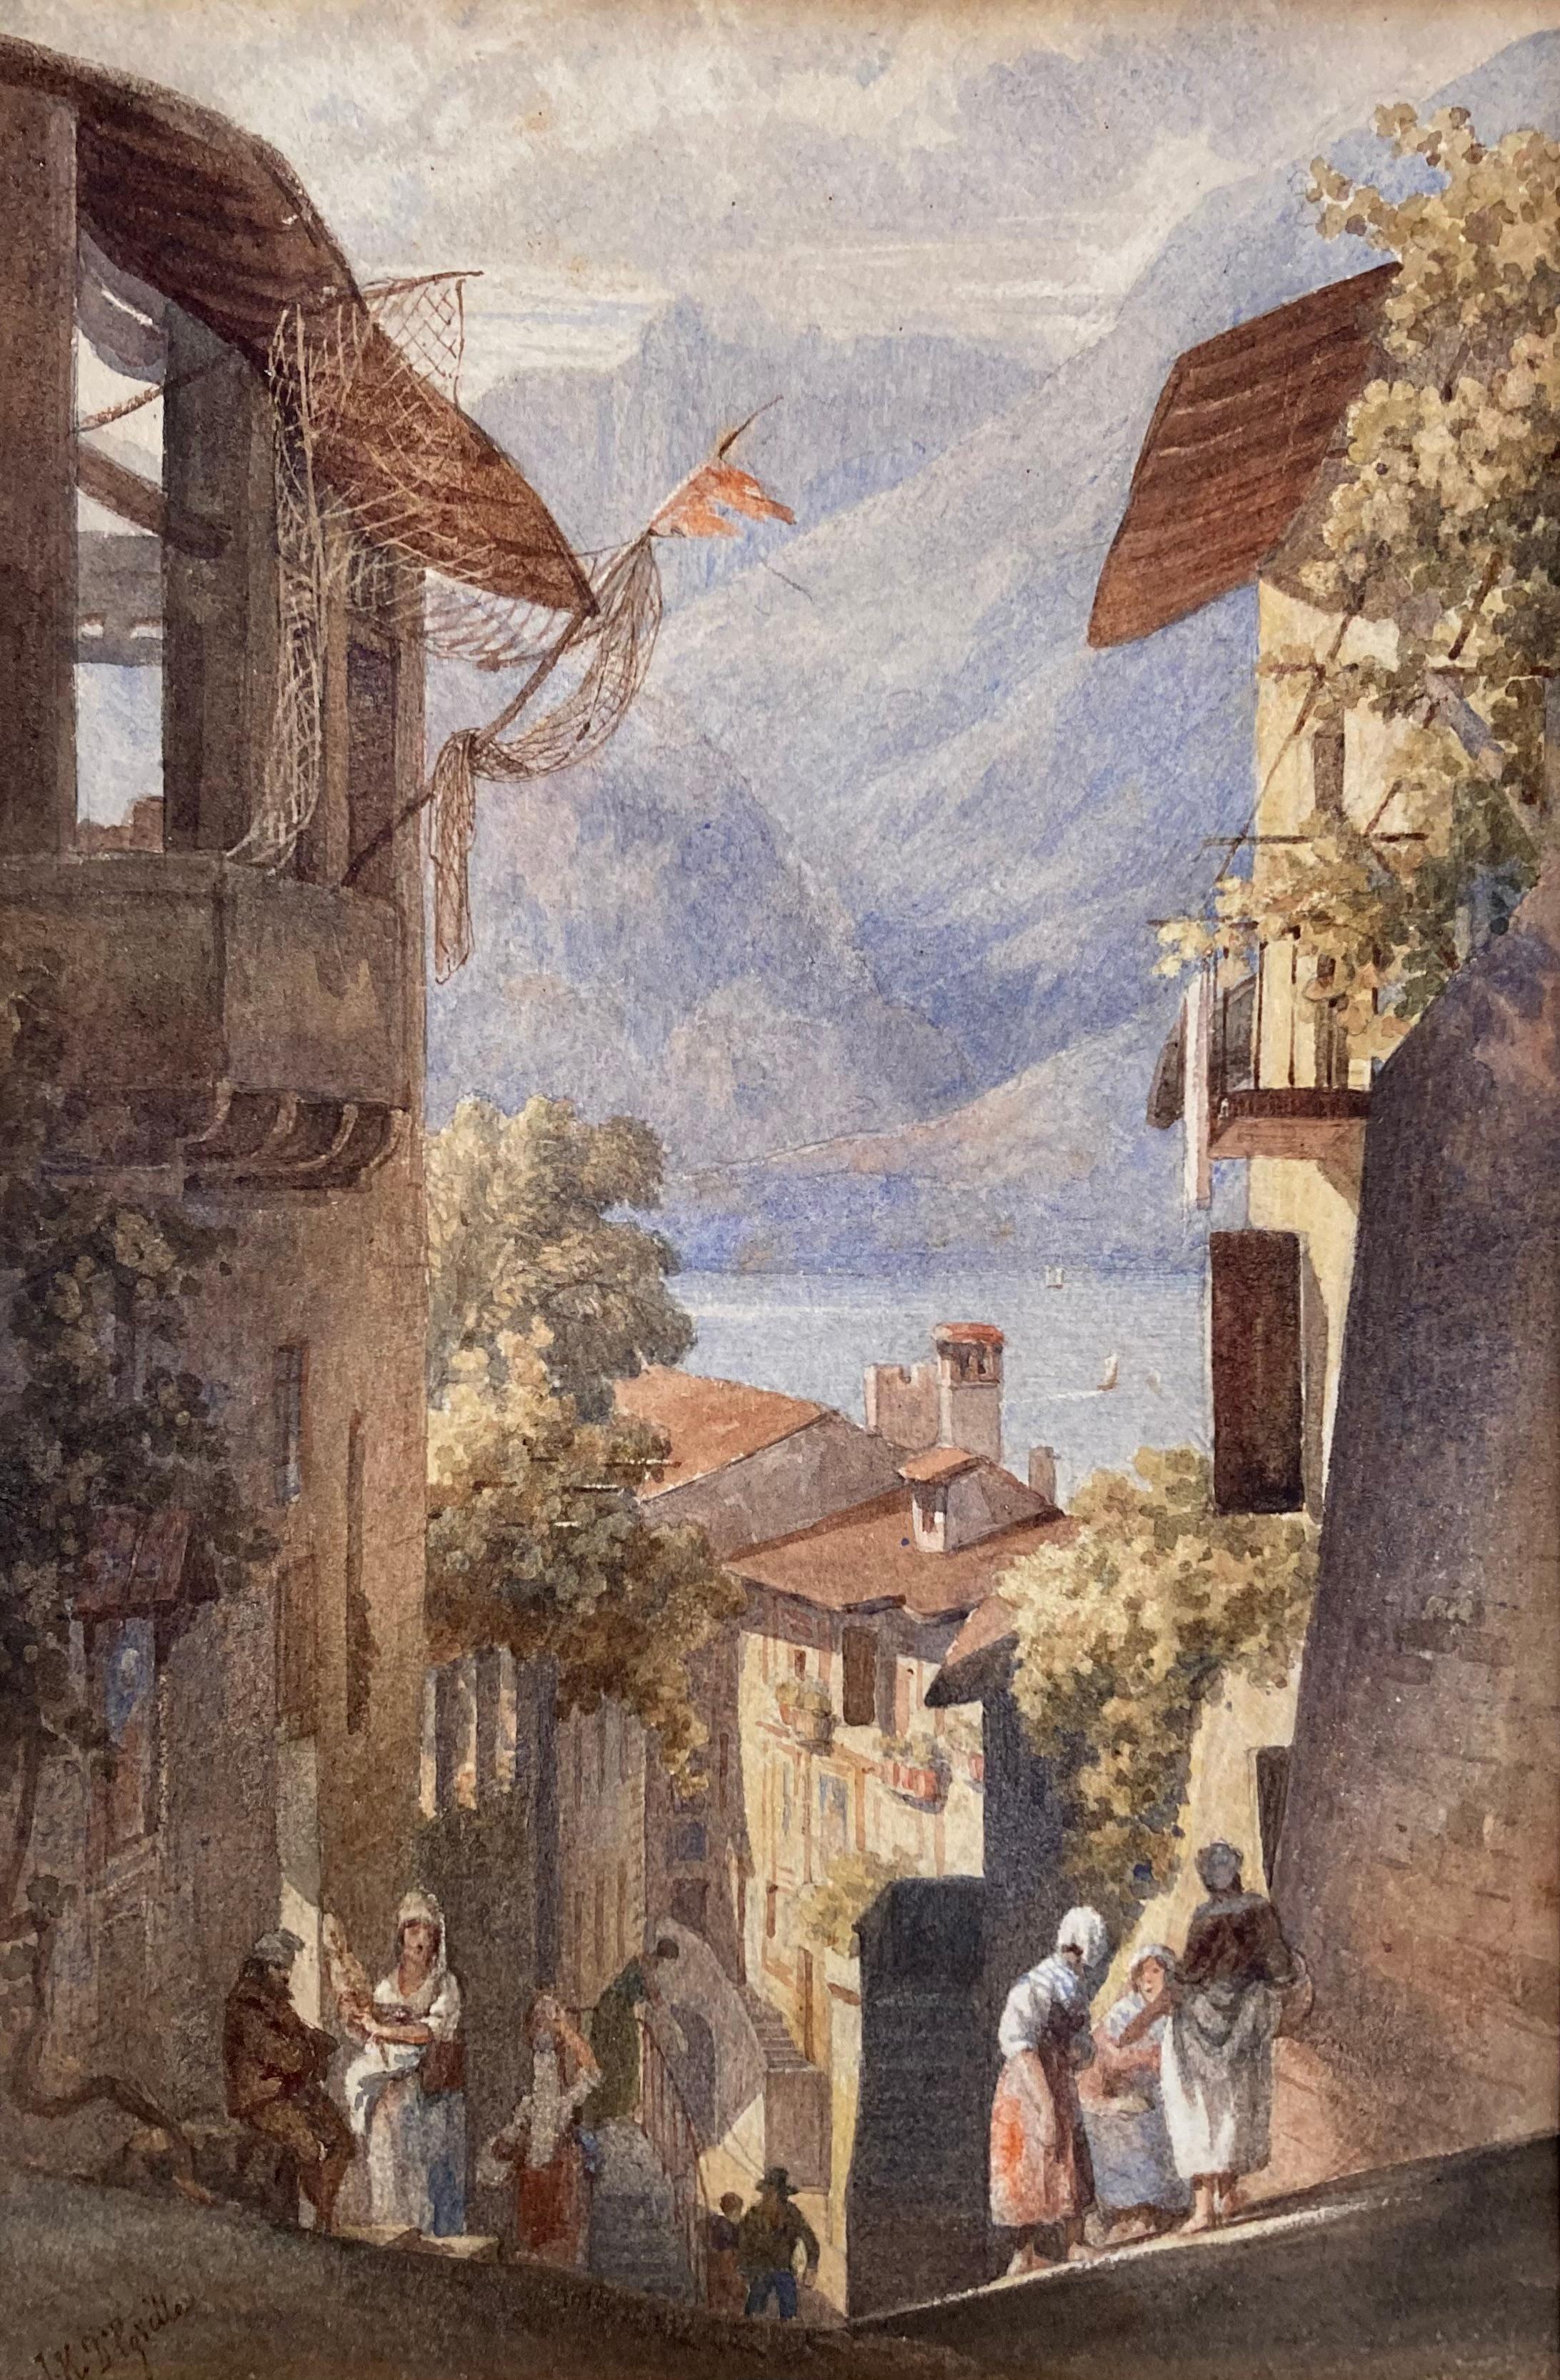 A really charming view of figures on a street by an Lake Como

James T Herve D'Egville (1806-1880)
Figures on hilly street with lake Como beyond
Signed
Watercolour
8 x 5¼ inches without frame
15¼ x 13 inches with the frame

The son of a ballet